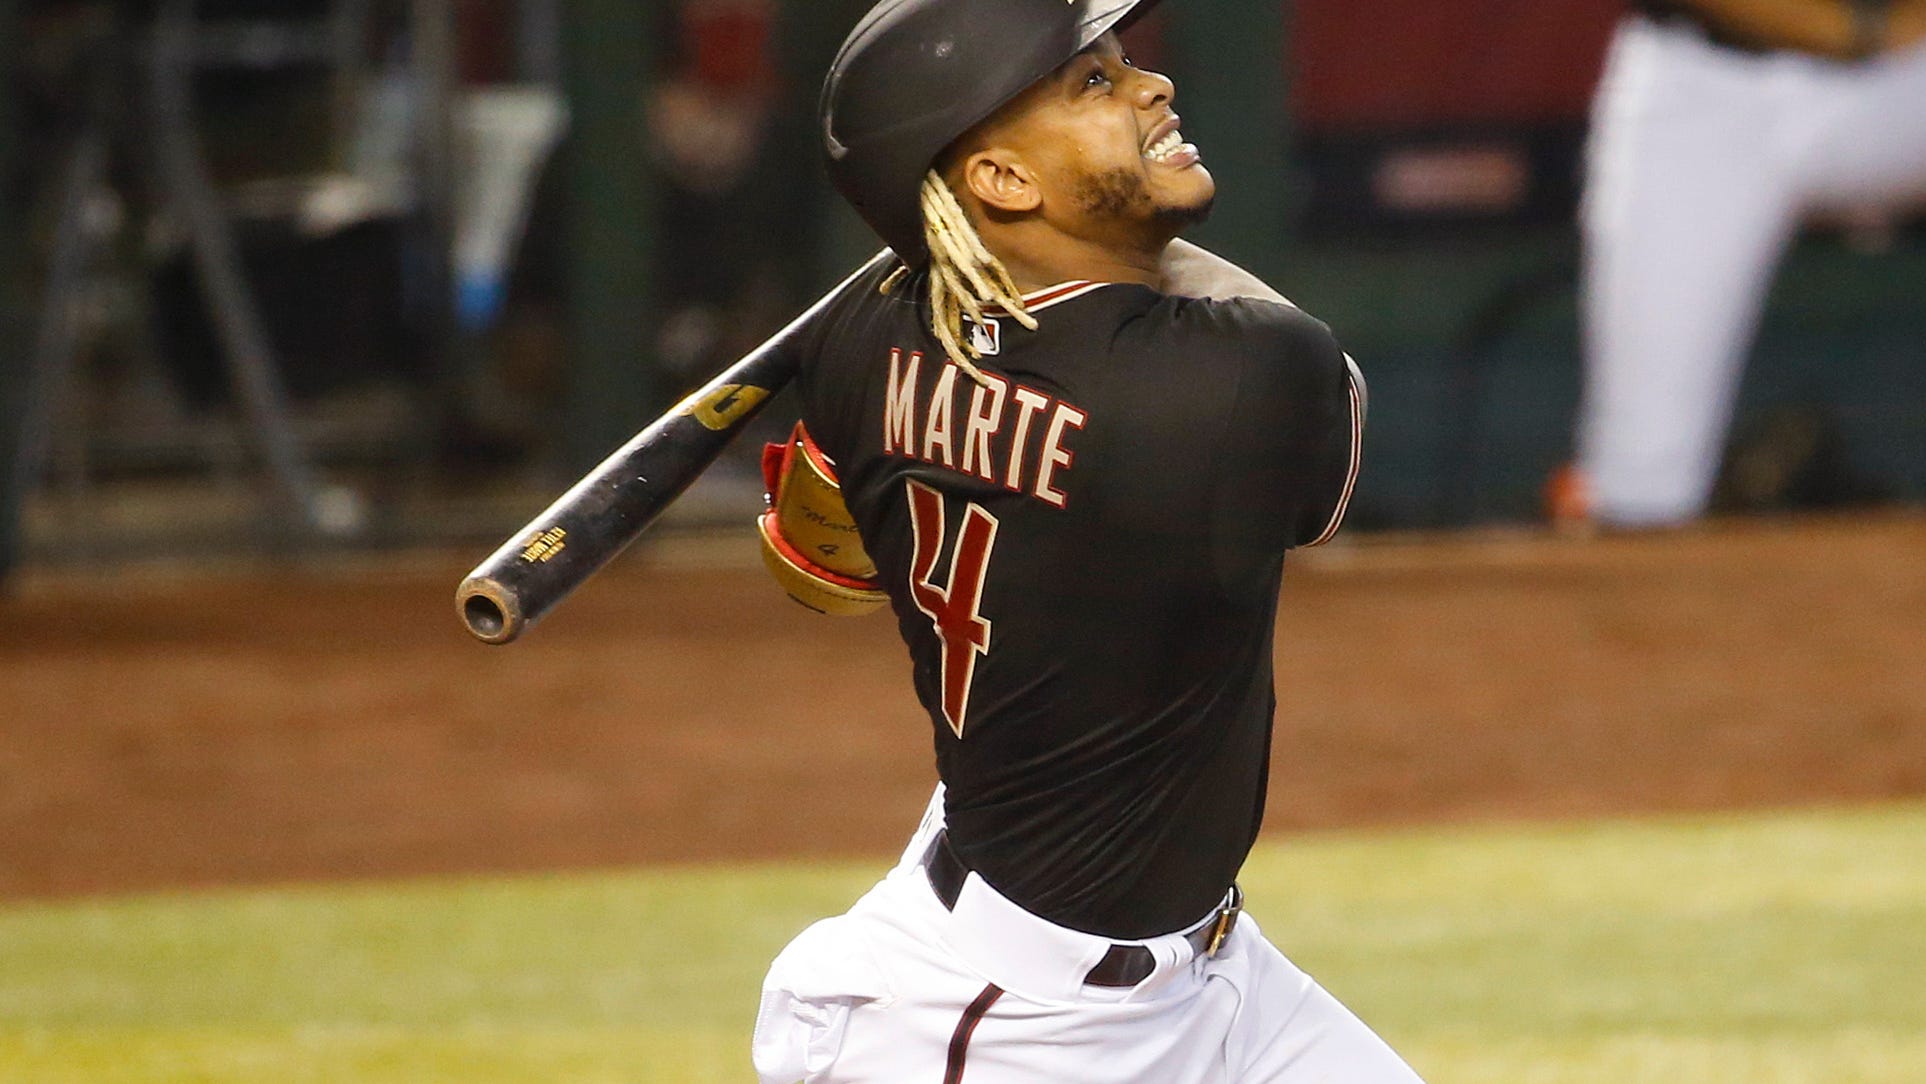 Ketel Marte’s reemergence could be key to DBacks’ 2021 hopes